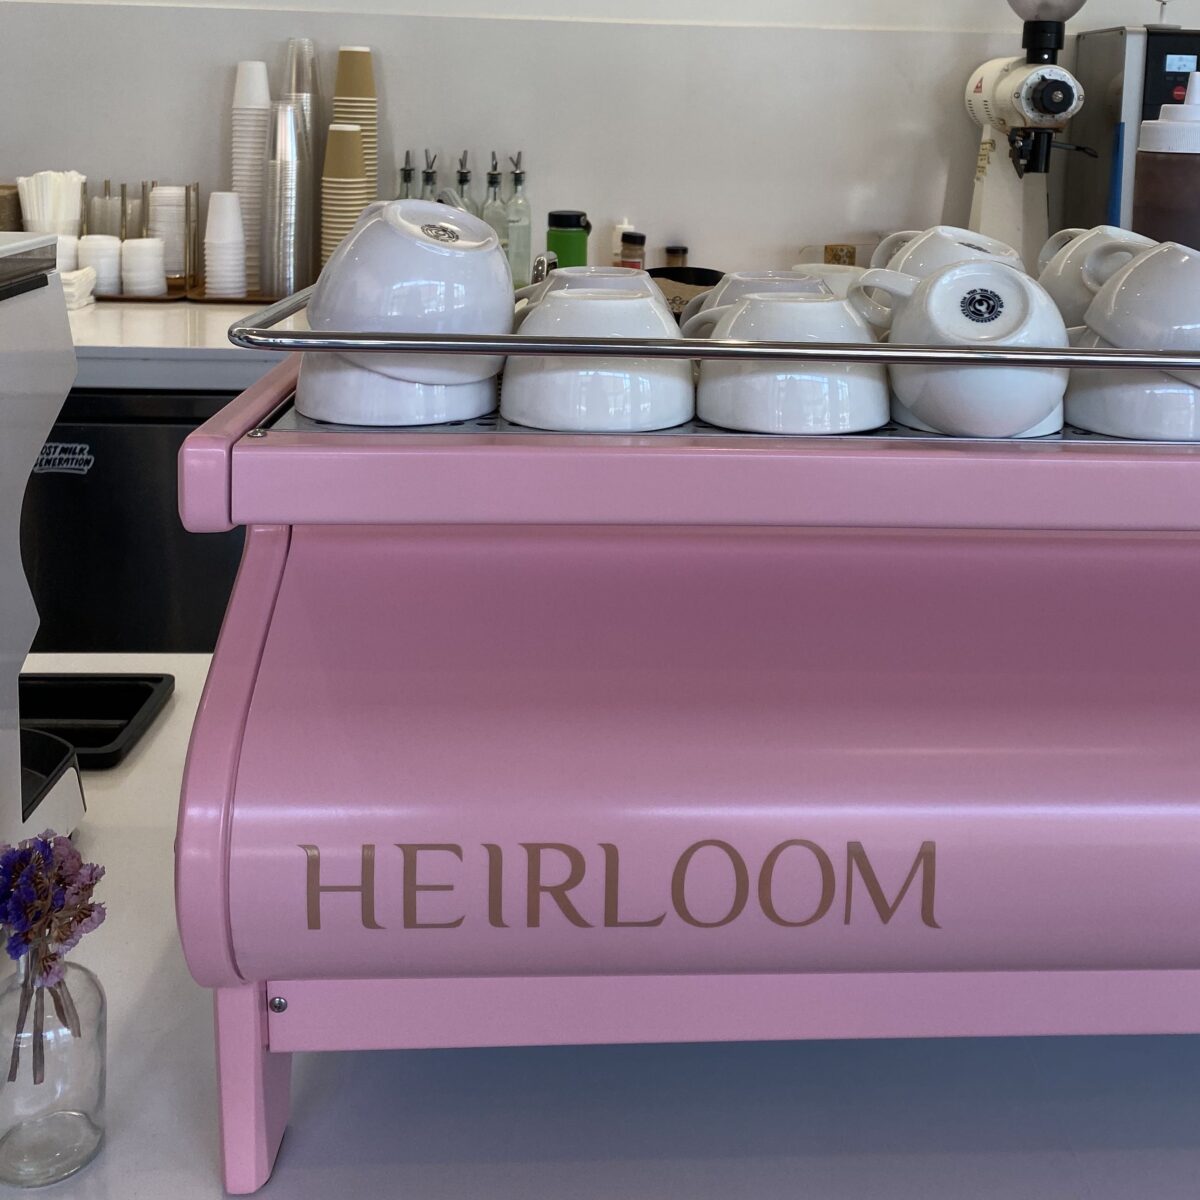 This photograph features a pink coffee machine that says "HEIRLOOM" in all caps, with white mugs sitting on it.